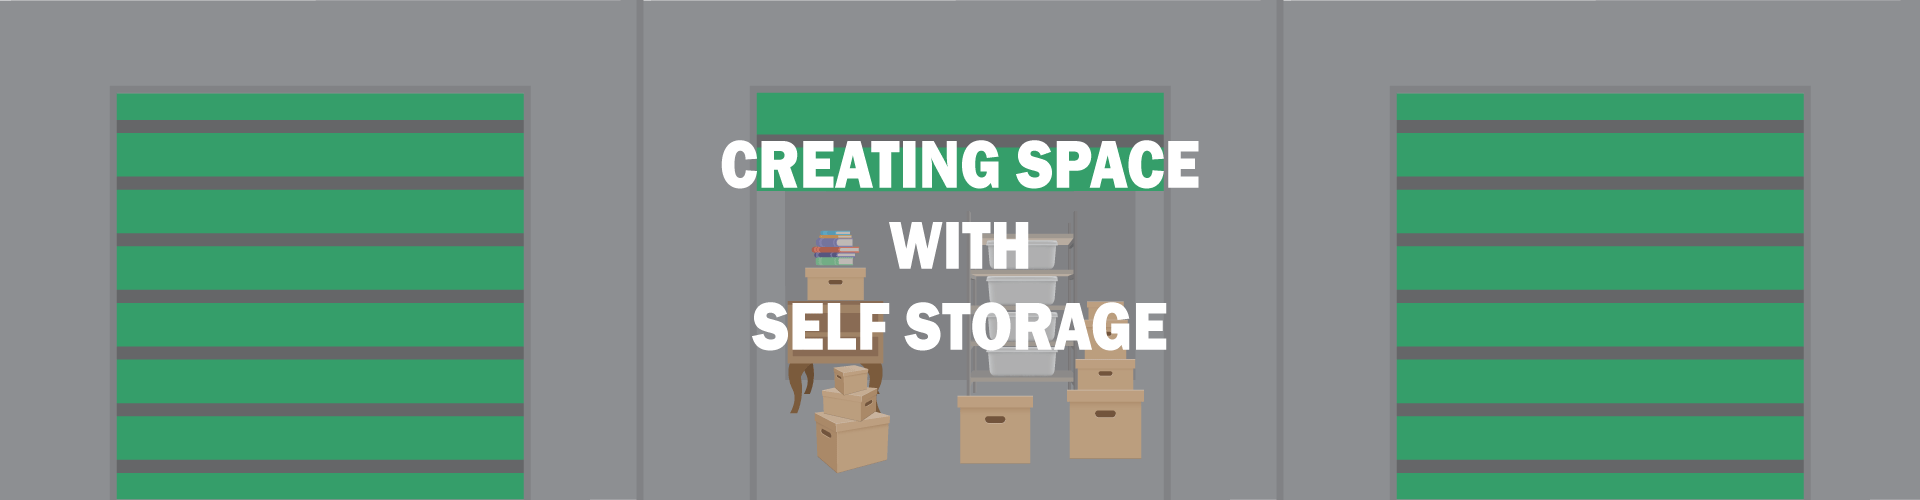 Creating-Space-With-Self-Storage